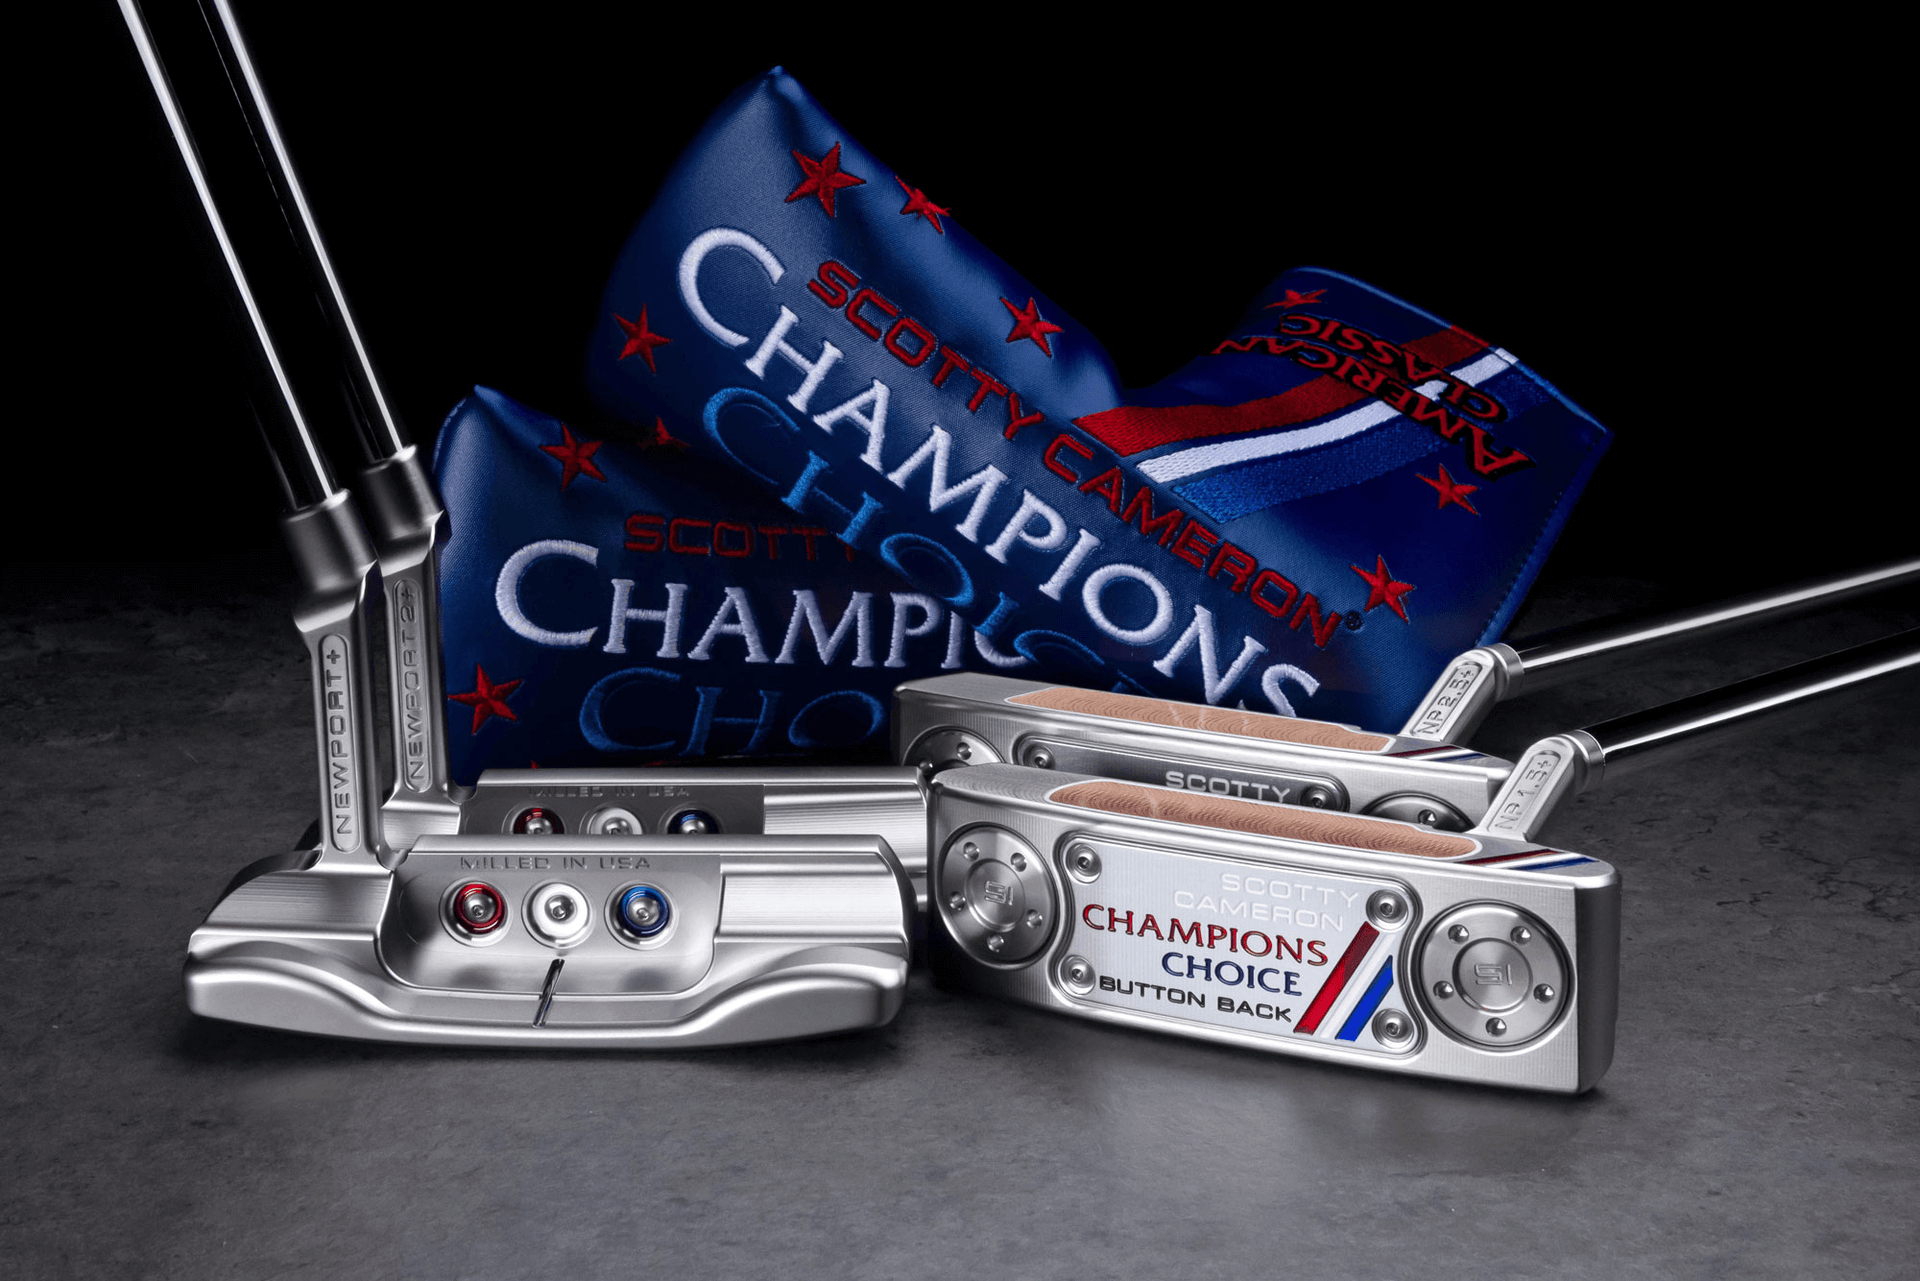 Limited Edition Putters